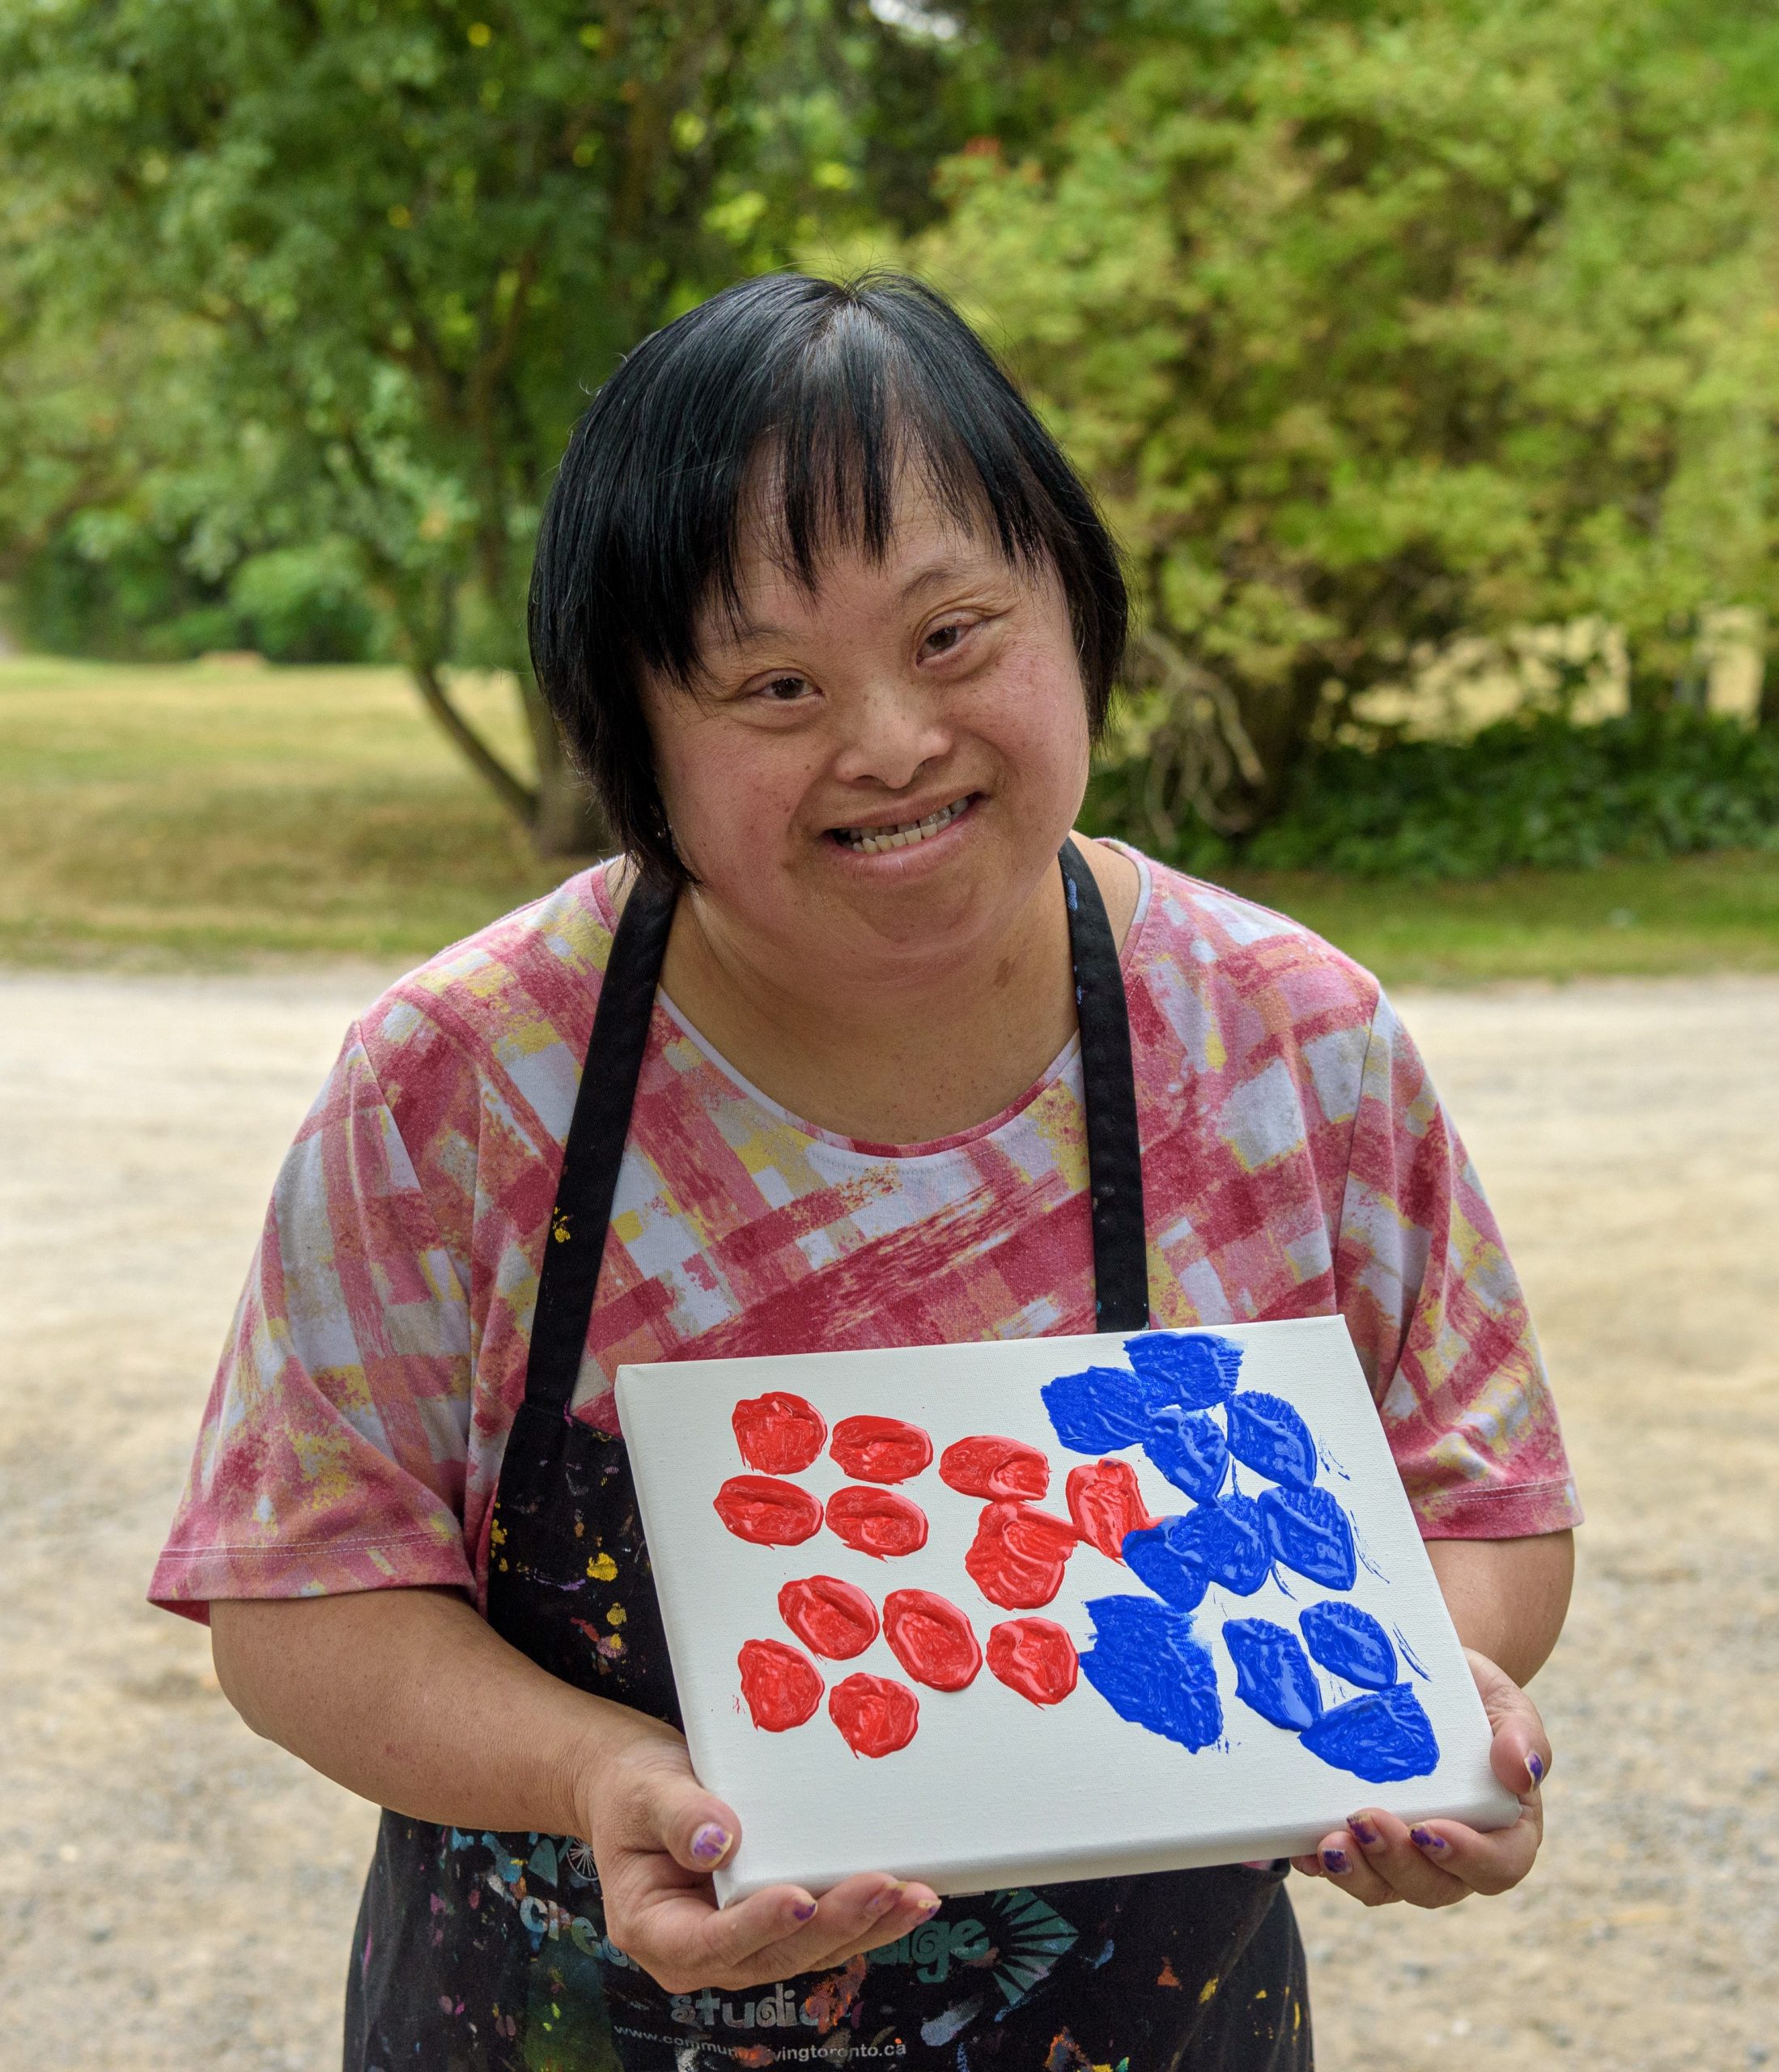 A woman with short black hair smiling while proudly holding up her artwork she created. Artwork is all white canvas with 12 red dots on one side and 11 blue dots on the other side. 